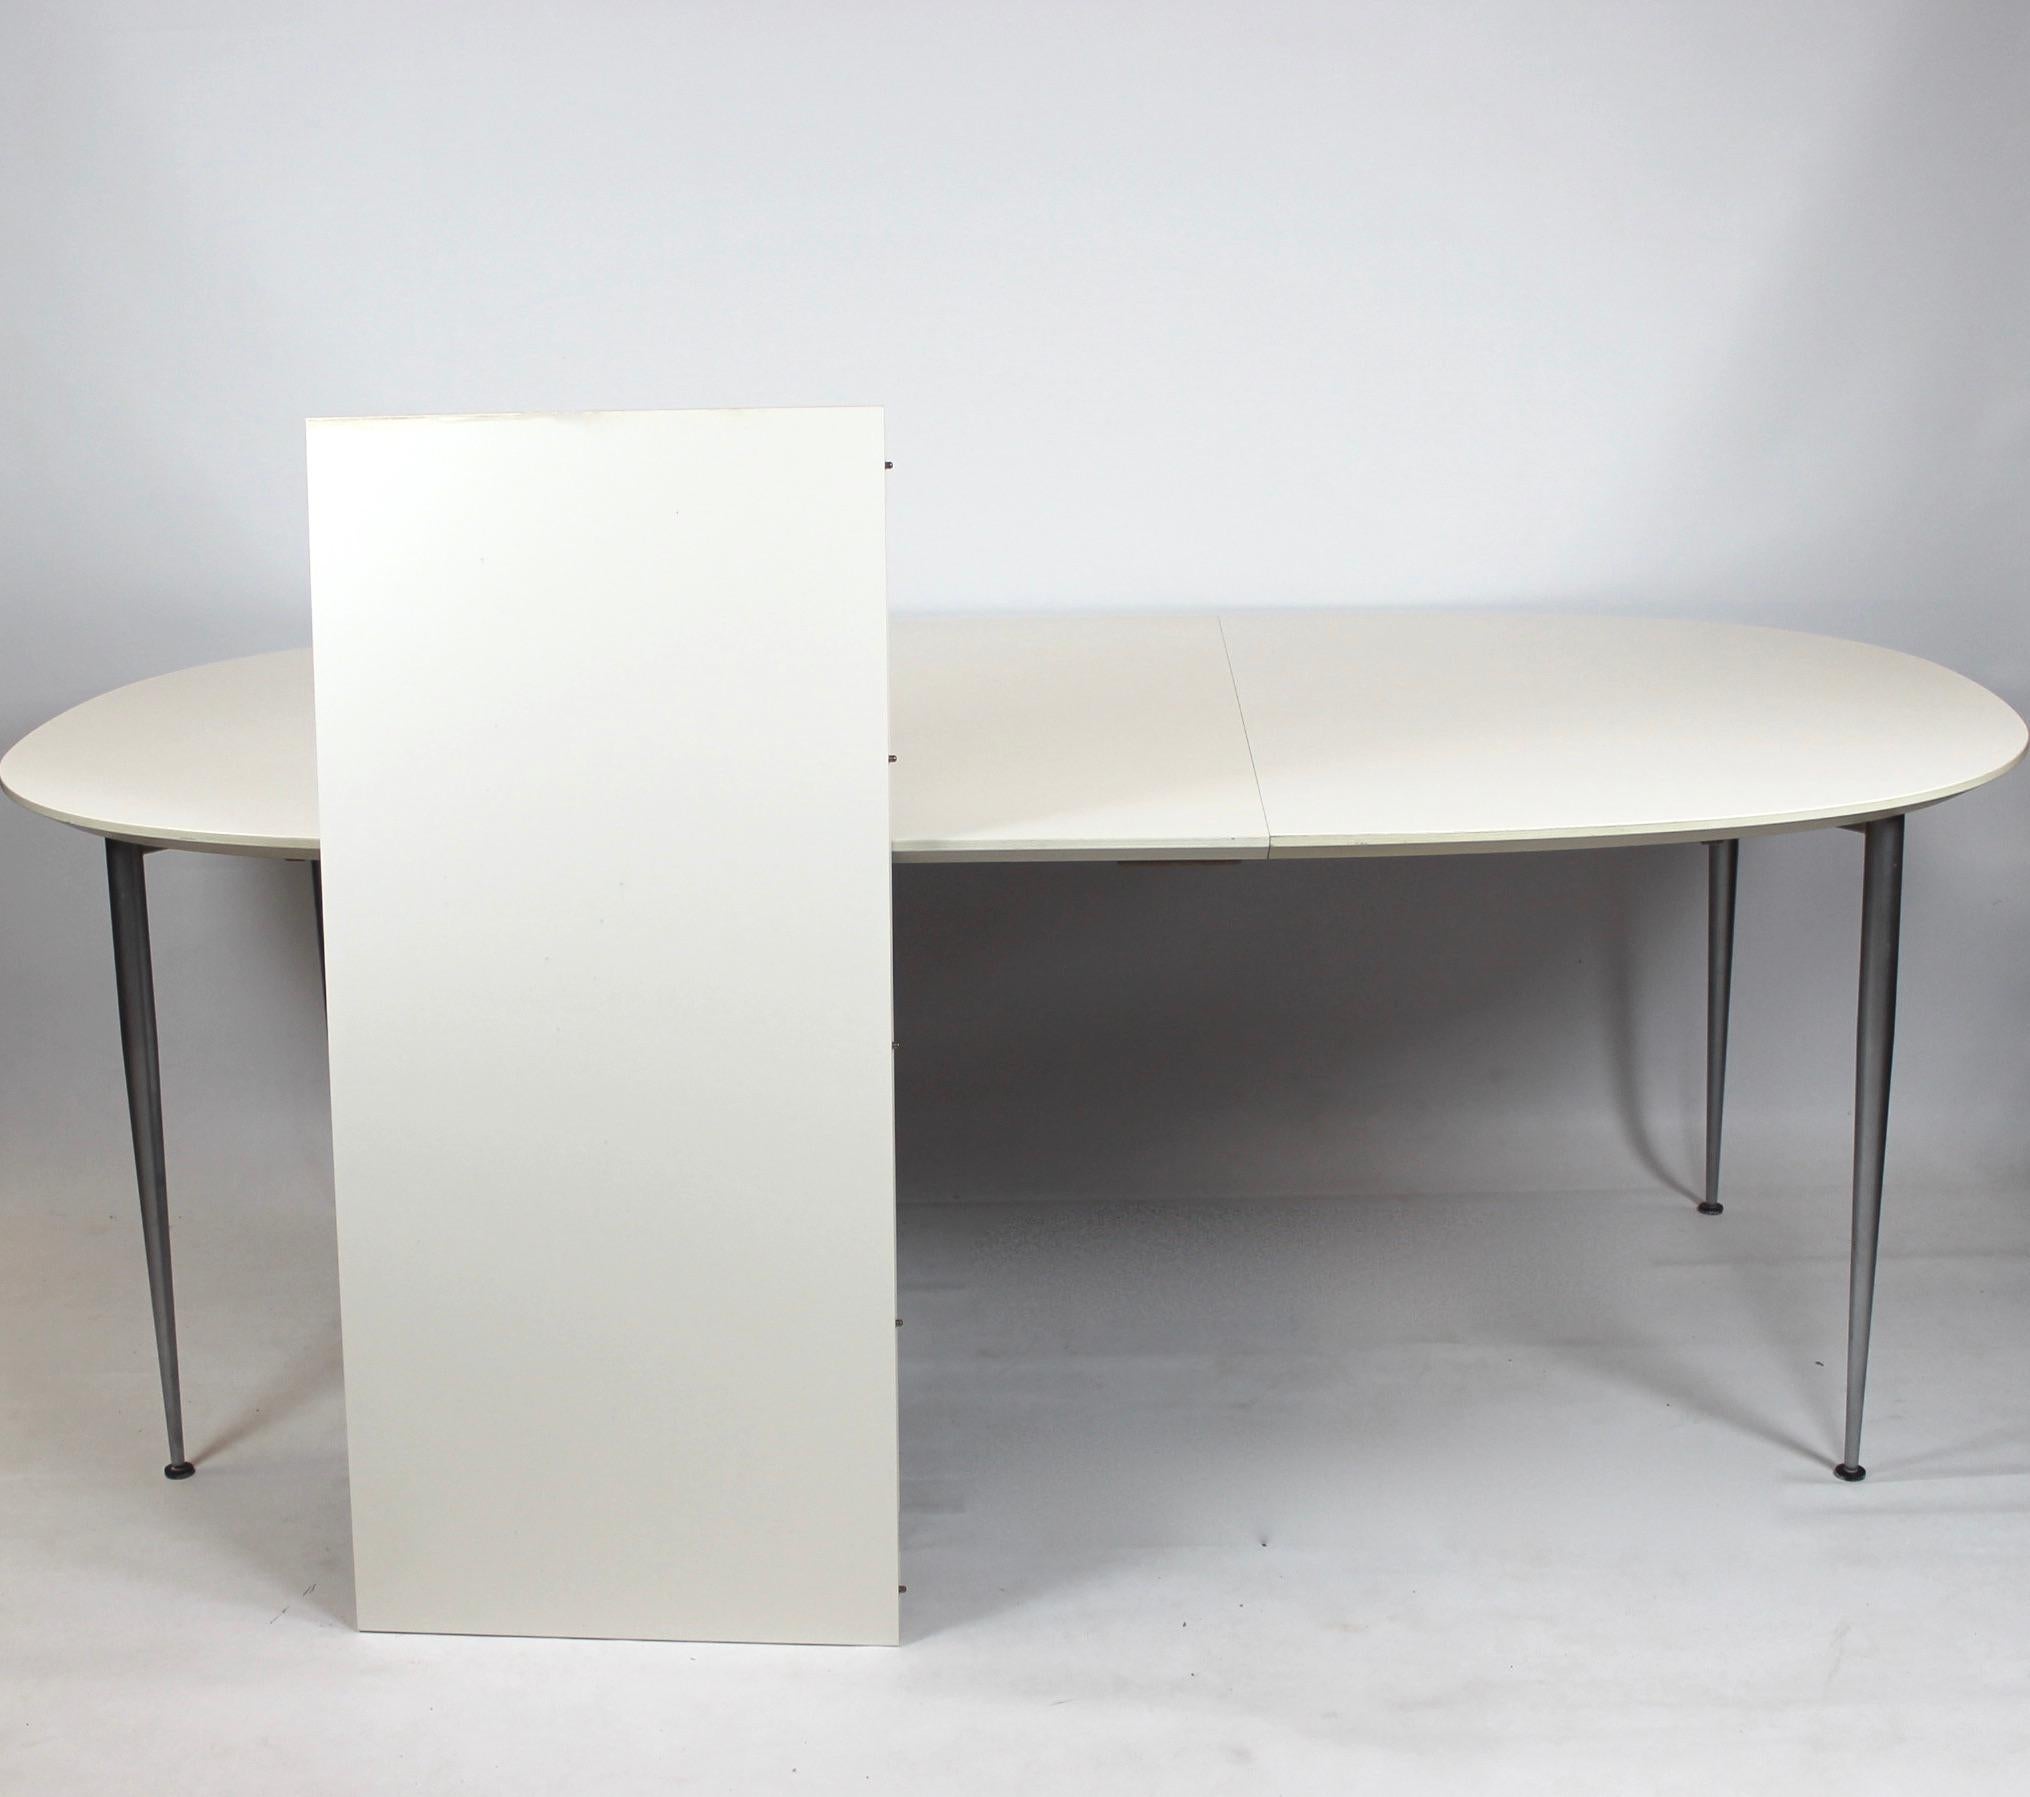 sunmica design for dining table